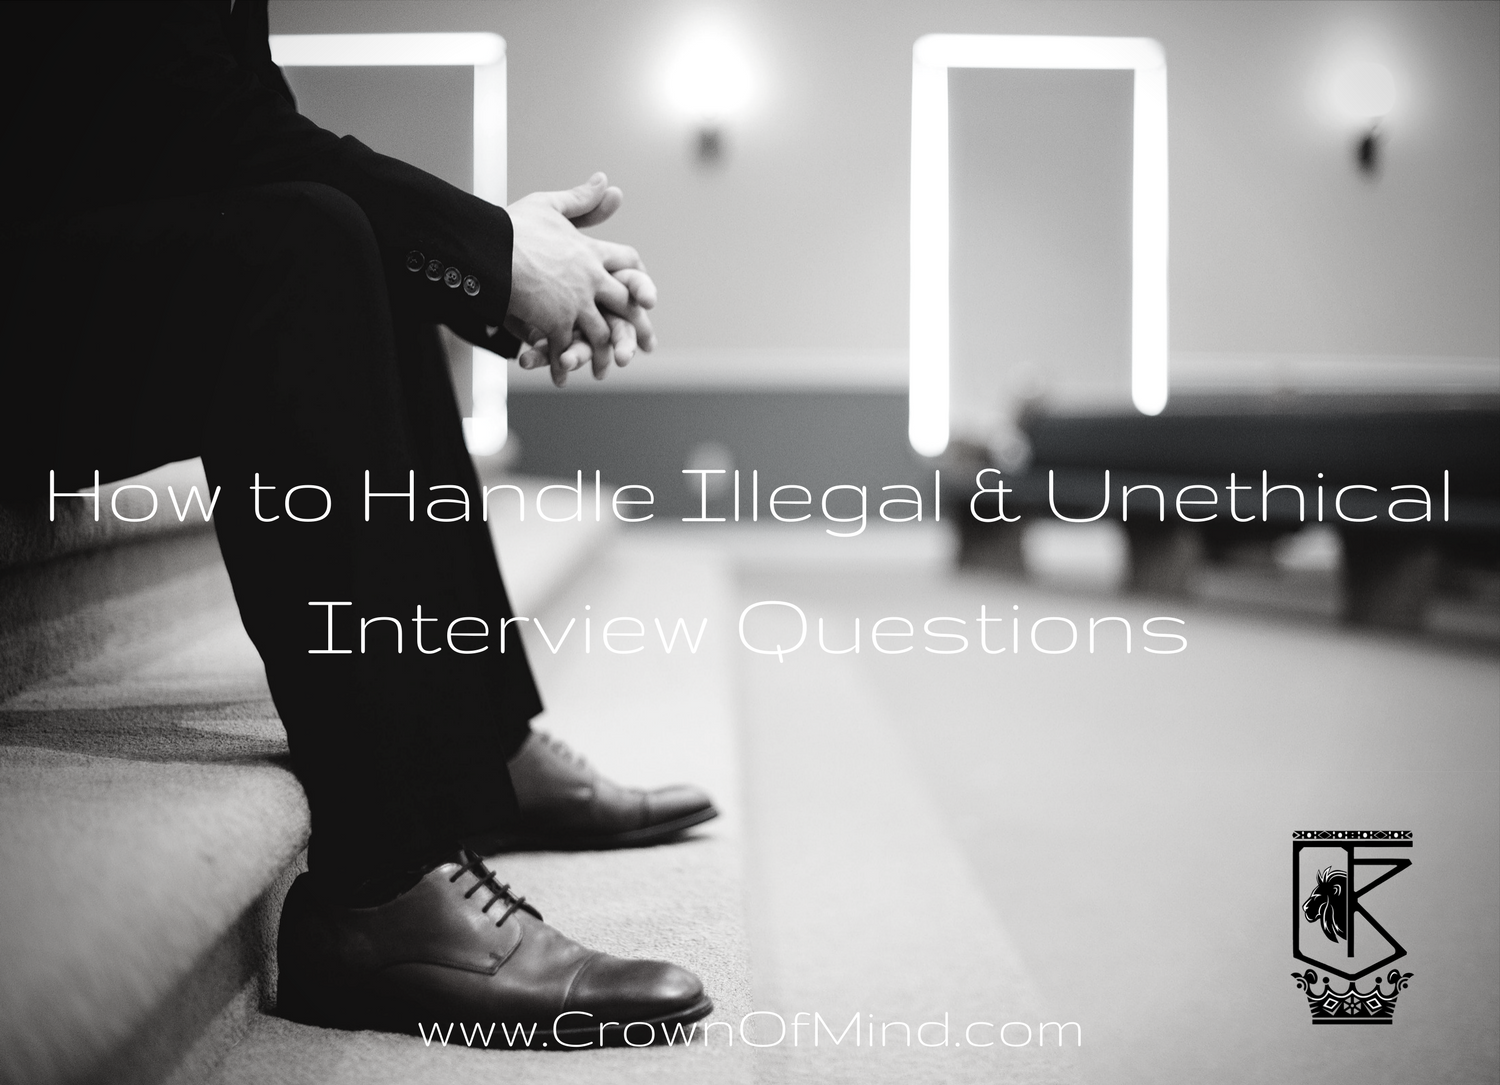 How to Handle Illegal & Unethical Interview Questions